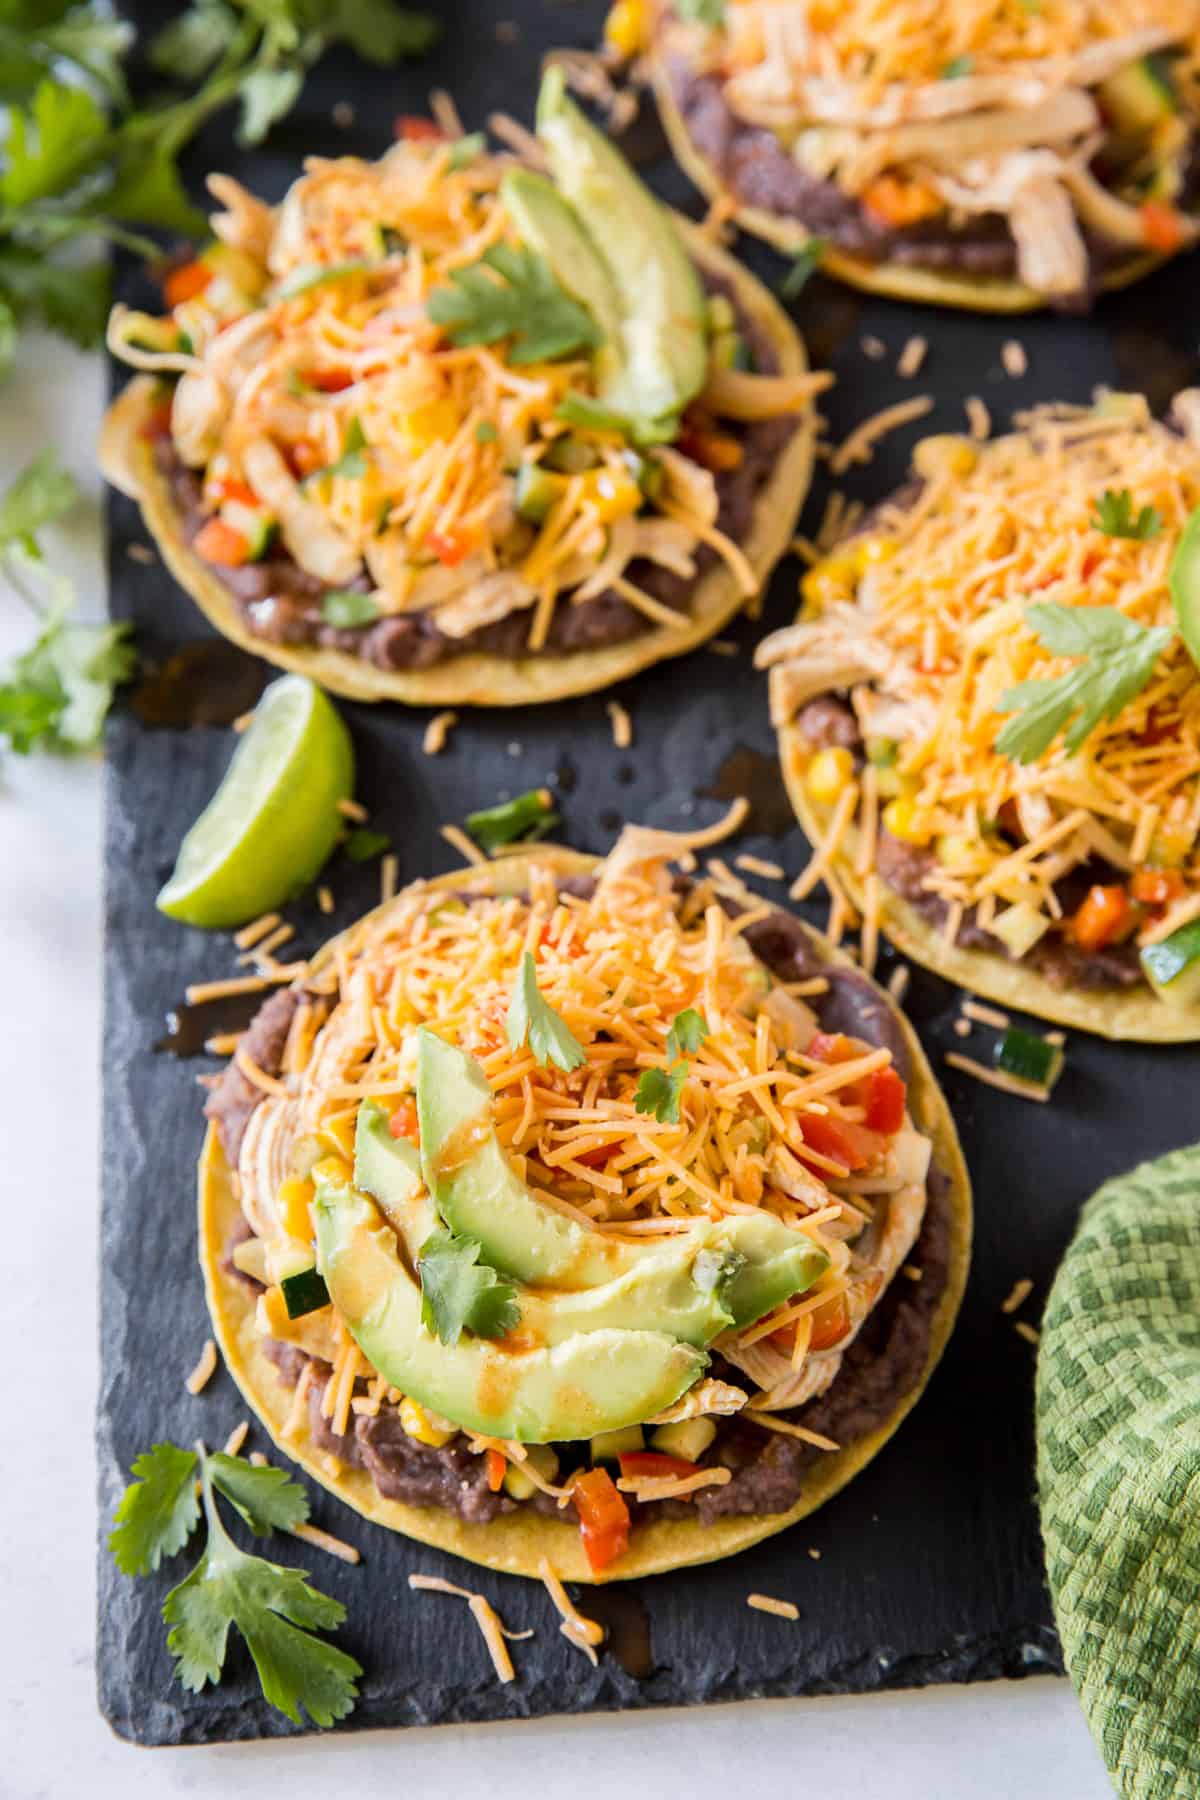 Tostadas topped with shredded cheddar cheese and sliced avocado.